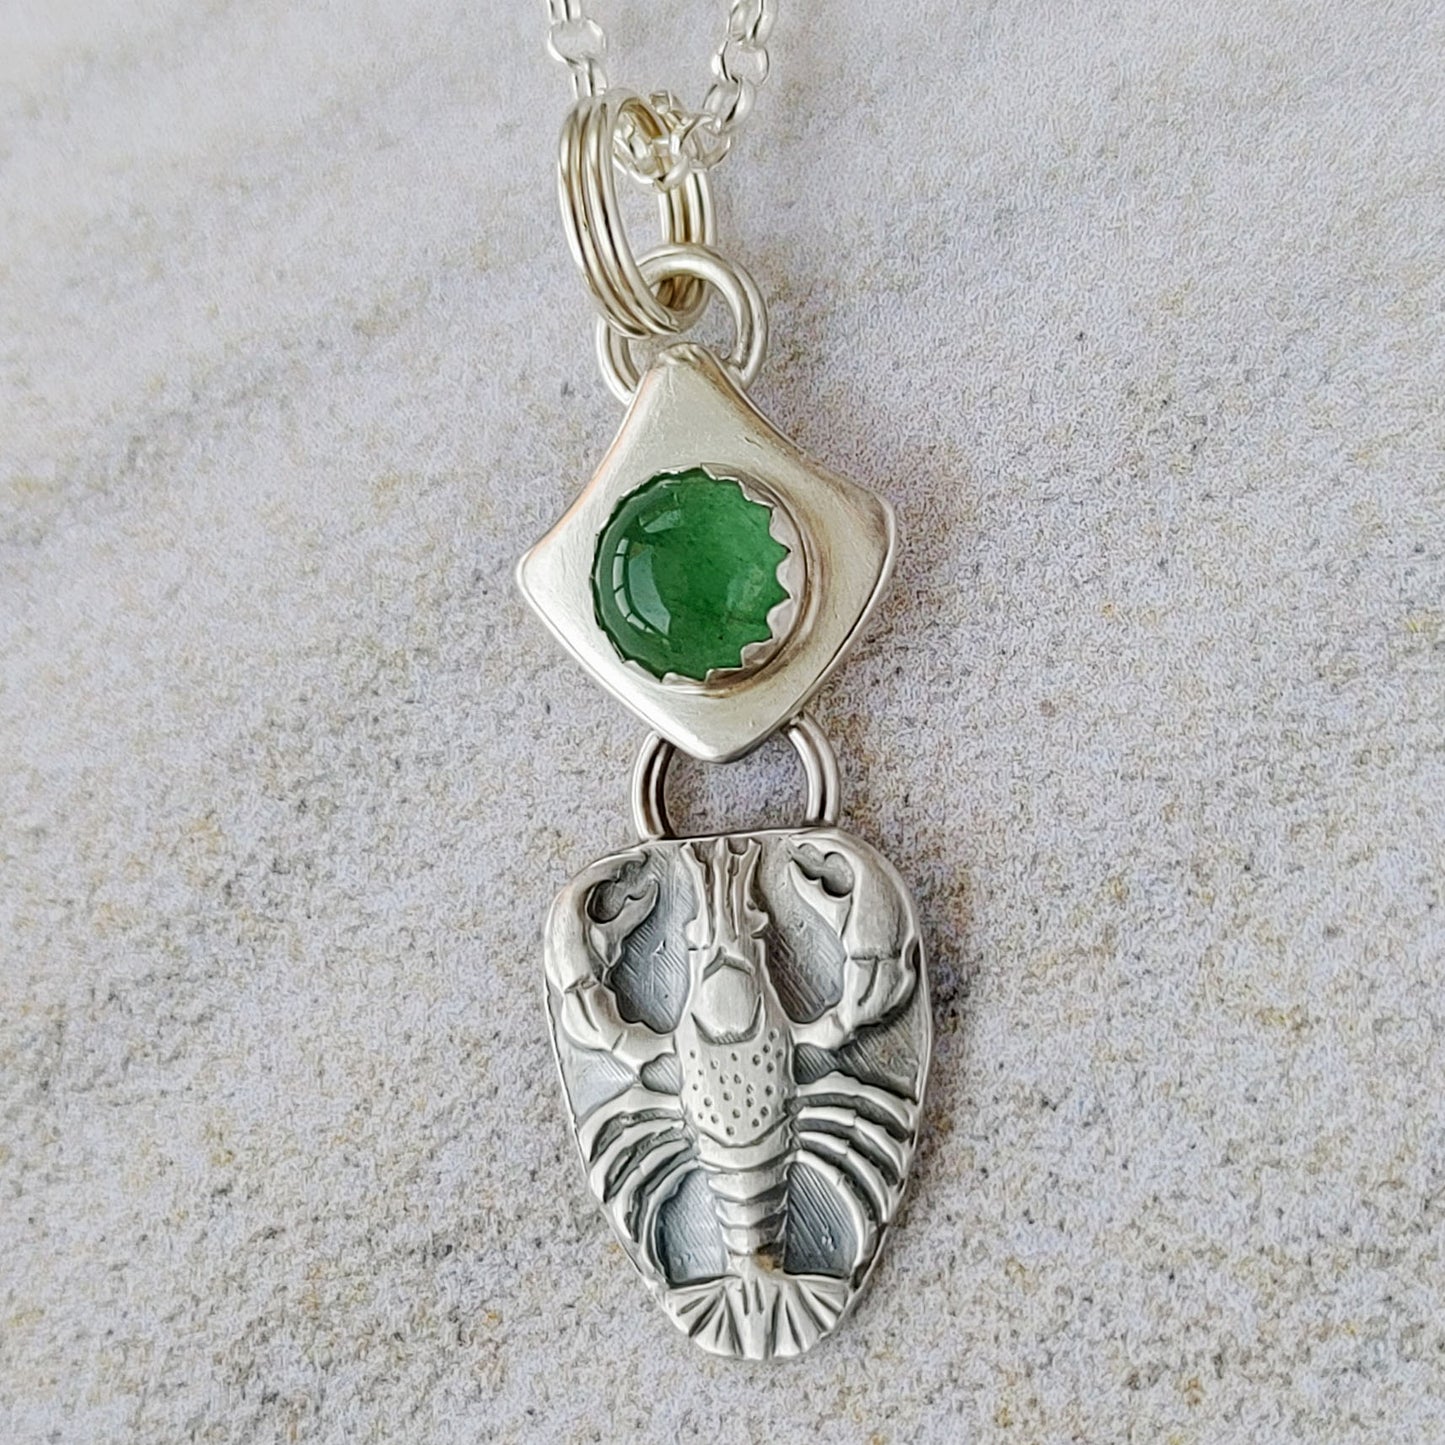 This pendant is a finely detailed raised lobster impression, the gemstone is a 6mm aventurine cabochon set on a curved square background, and the round background has a hammered line texture. Aventurine is a shimmering green form of quartz.  This pendant is 1-1/4 inches long and 1/2 inch across. It comes on an 18 inch sterling silver chain.